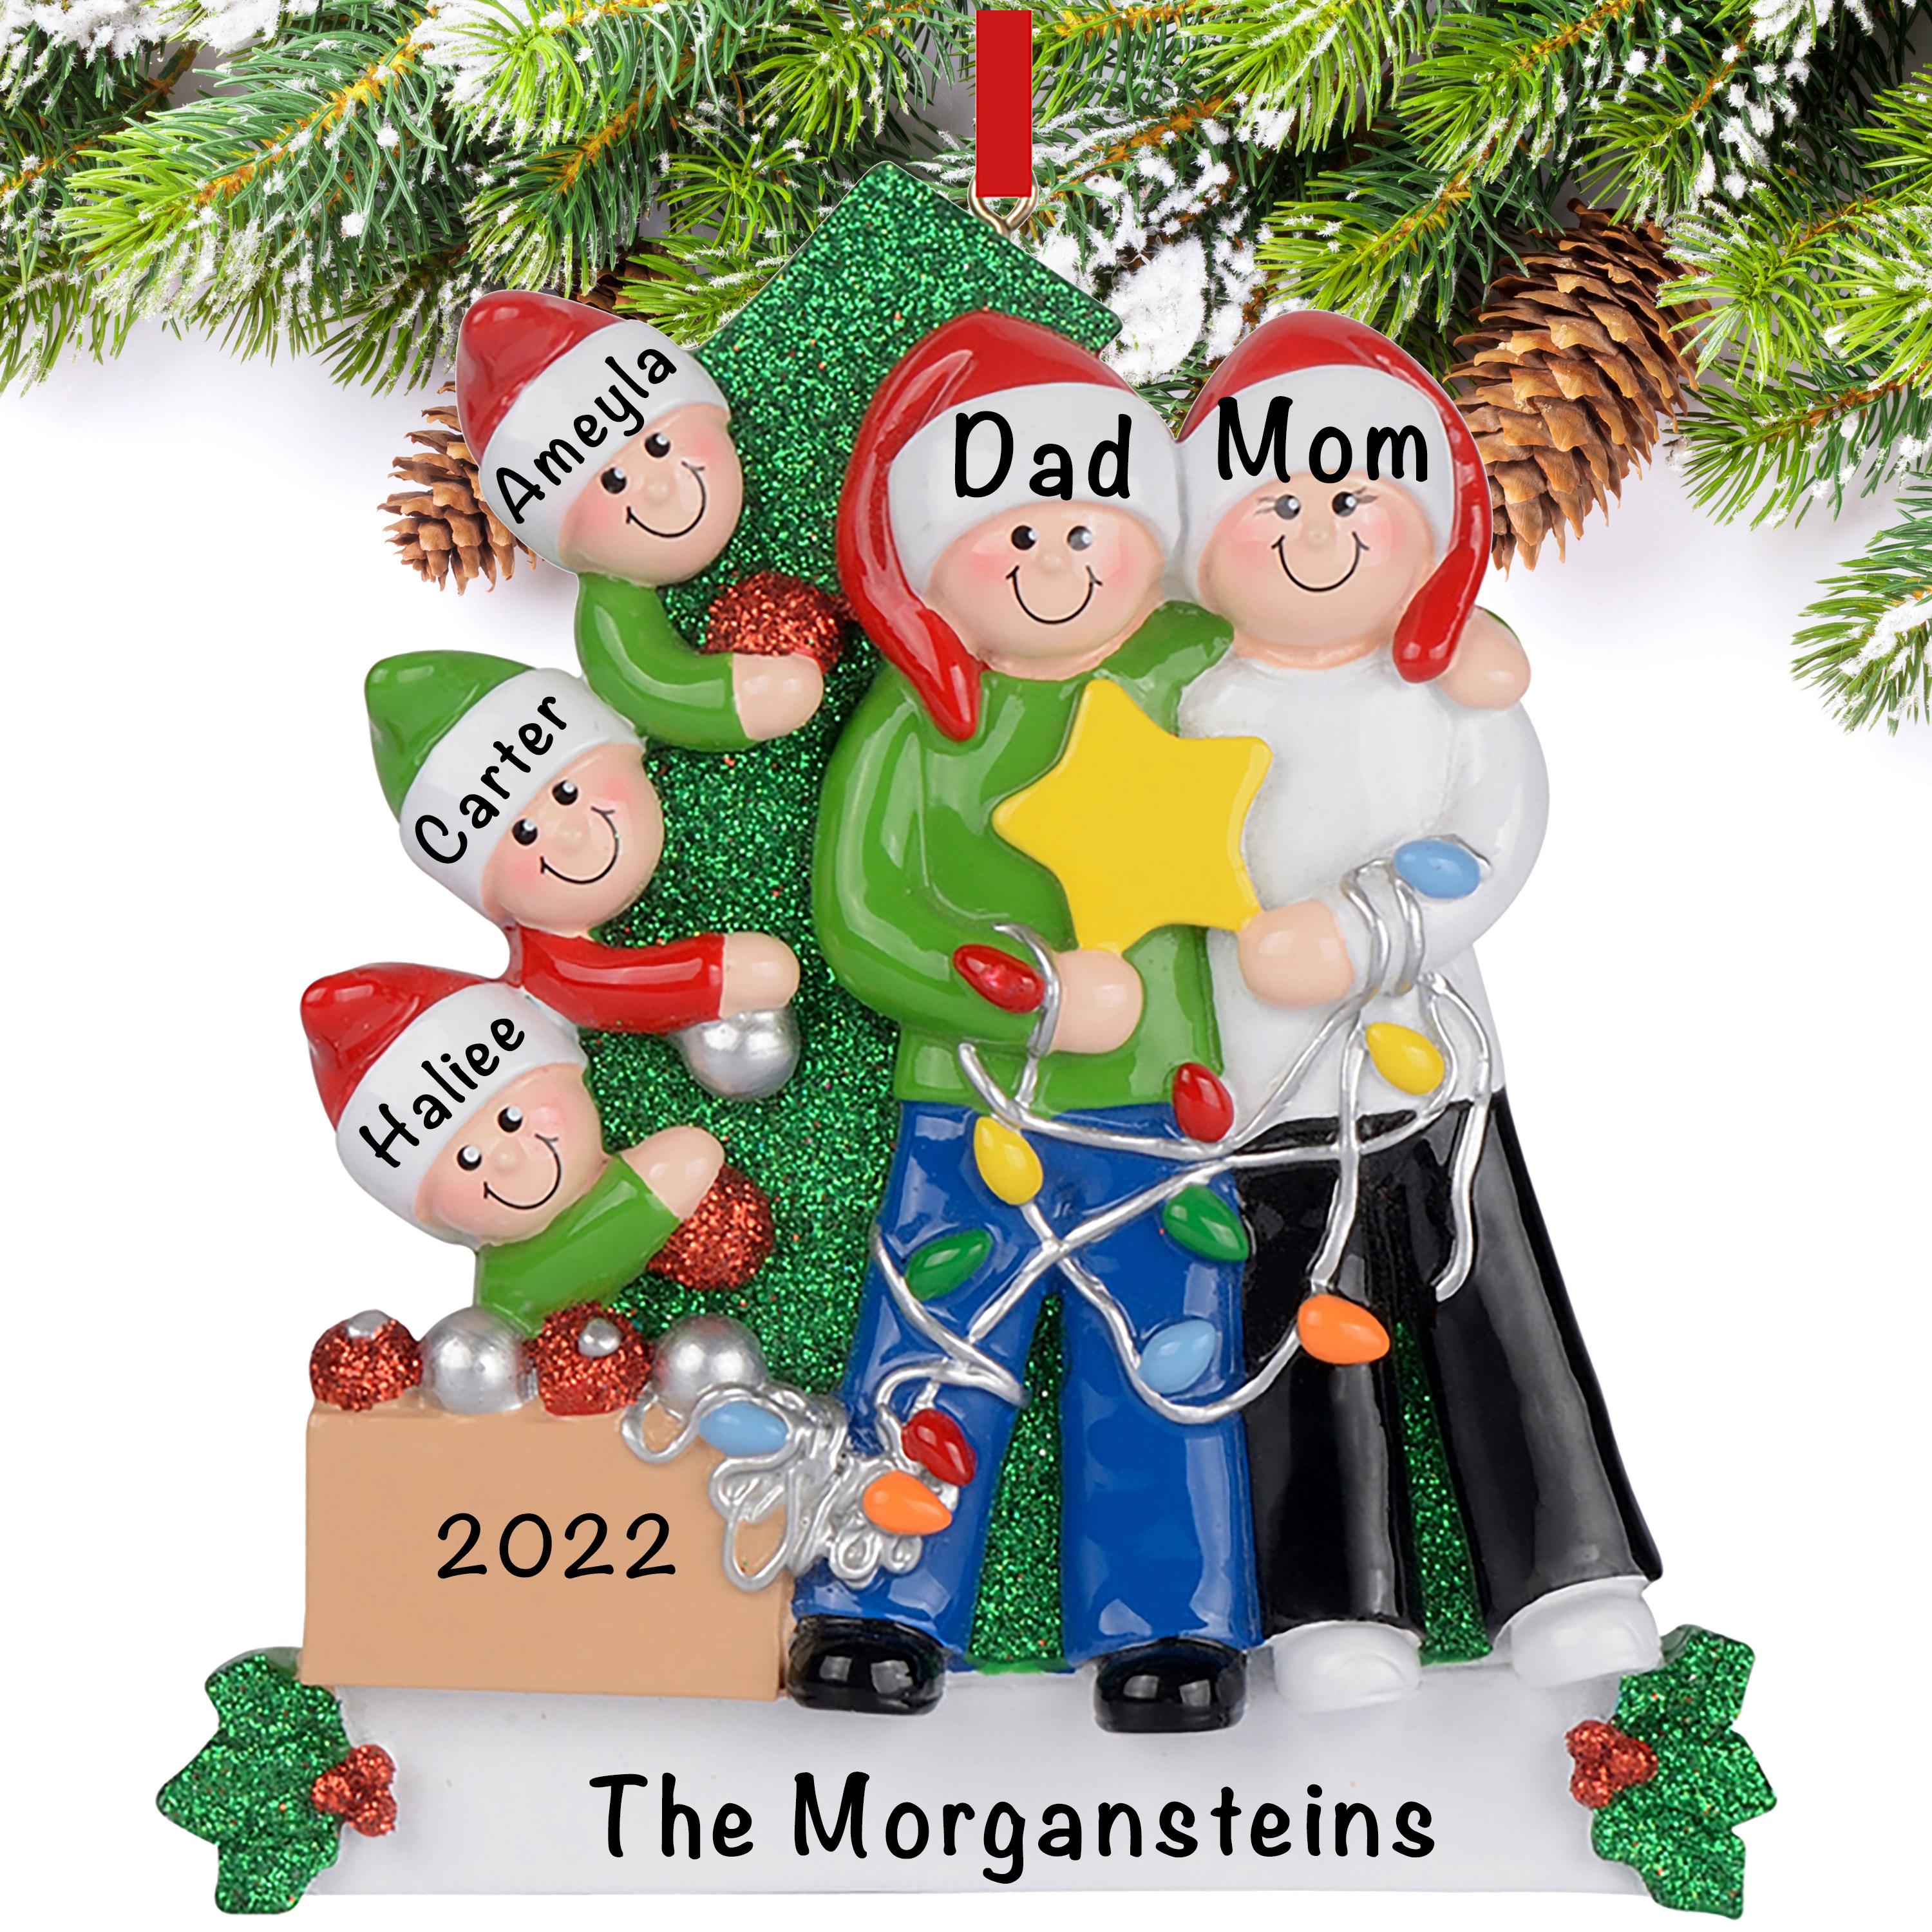 Decorating the Christmas Tree Family of 5 Personalized Christmas Ornament Holiday Traditions